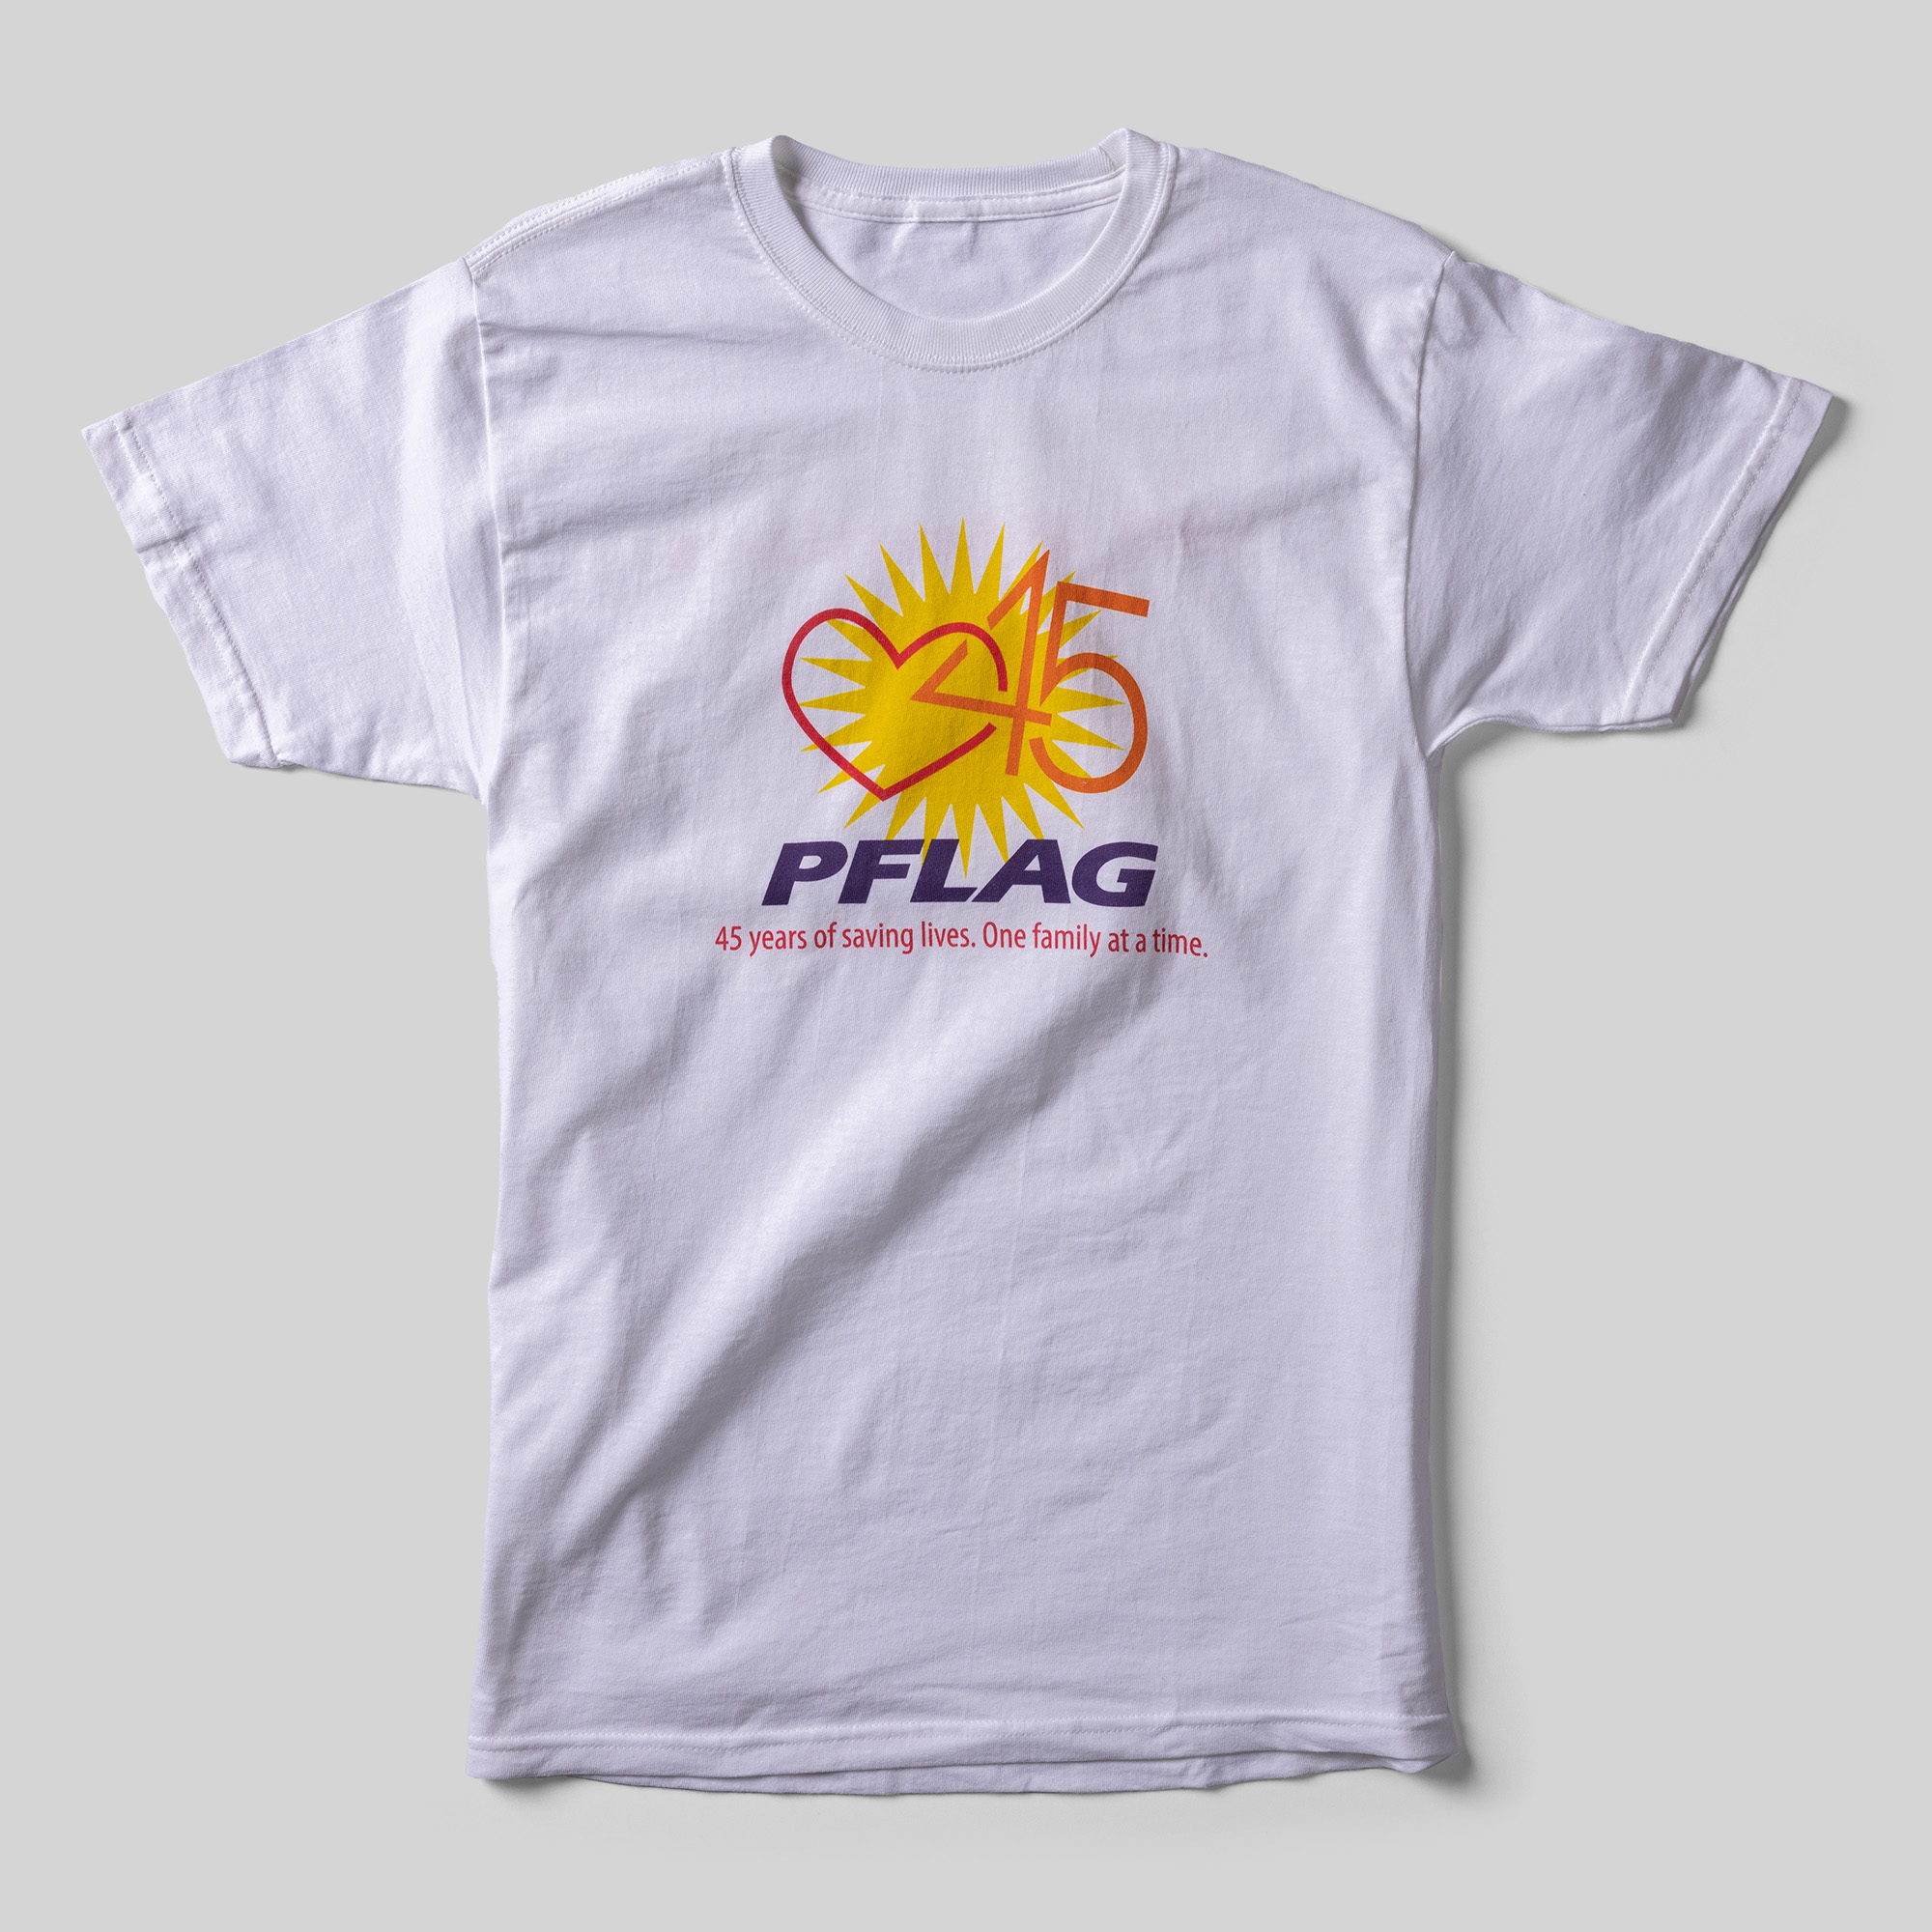 A white t-shirt that reads "PFLAG 45 years of saving lives. One family at a time." An illustration of 45 linked with a heart in front of a sun is above the text.